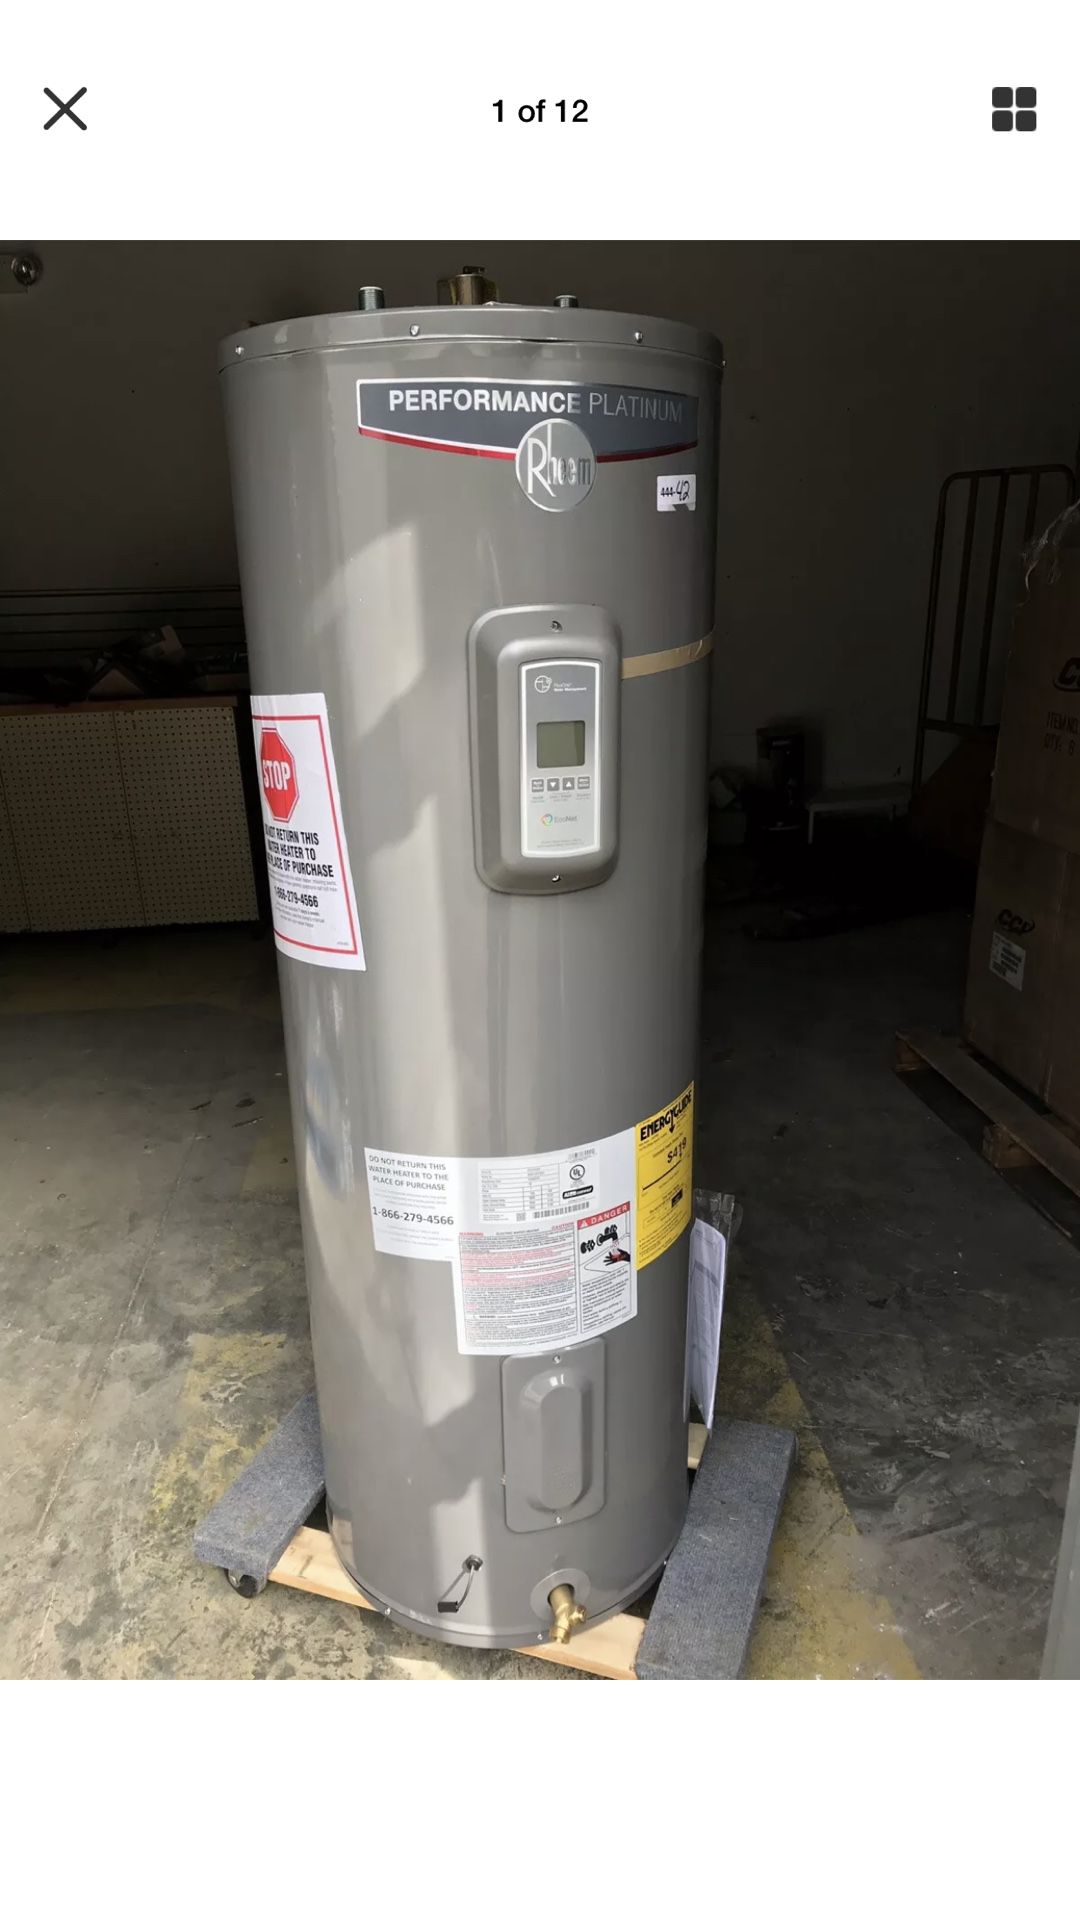 Performance Platinum High Efficiency Electric 50 Gallon Electric Water Heater with 12 Year Limited Warranty MODEL # XE50T12EC55U1